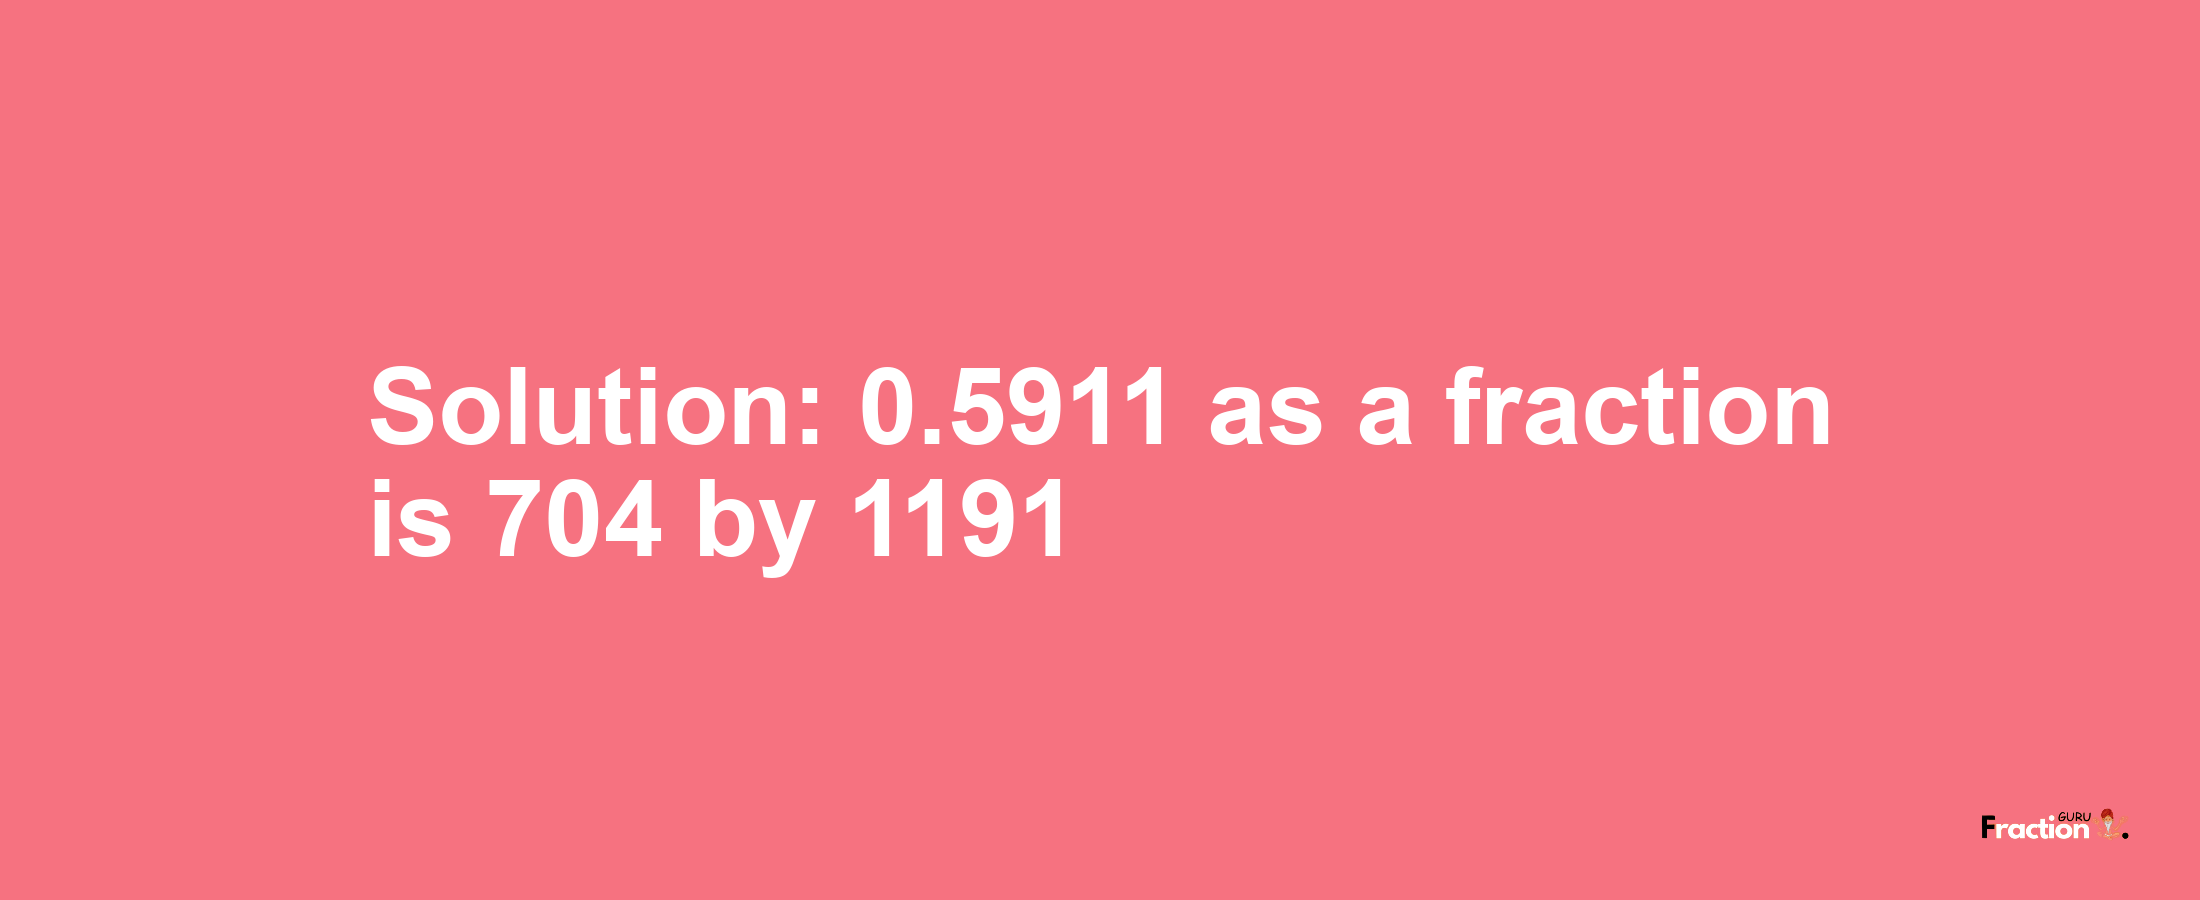 Solution:0.5911 as a fraction is 704/1191